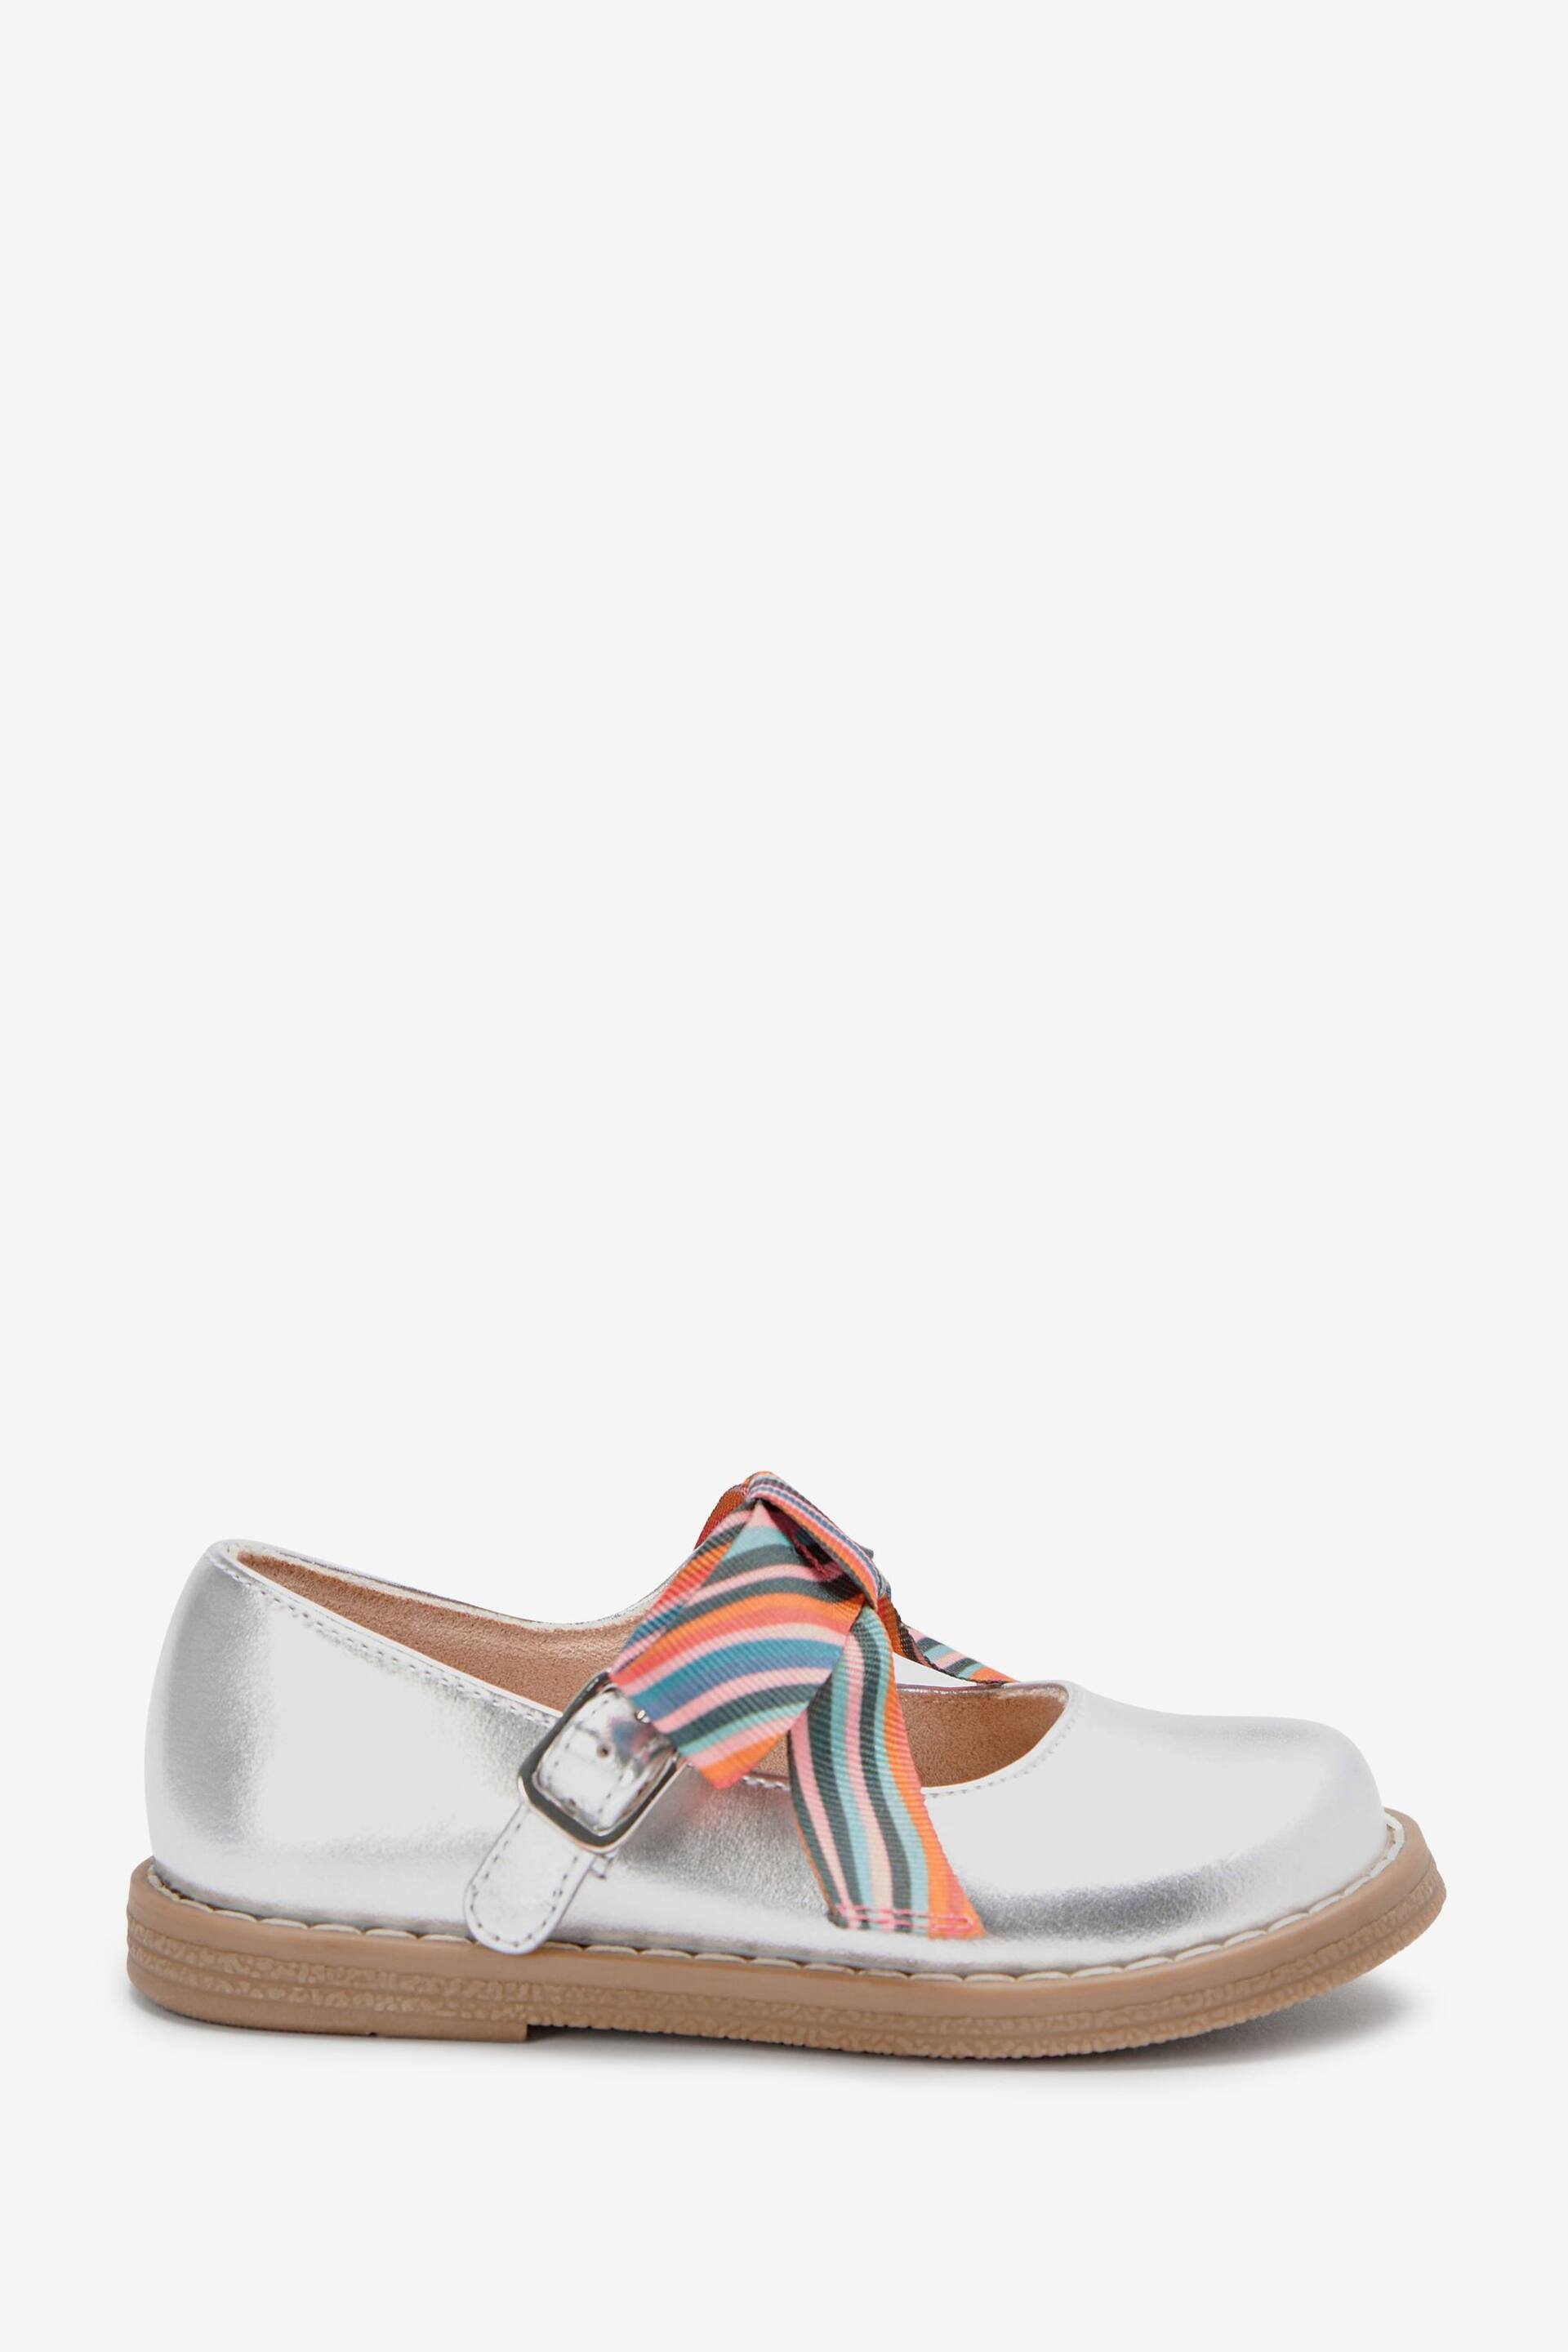 Paul Smith Junior Girls Silver Mary Jane 'Artist Swirl' Bow Shoes - Image 1 of 5